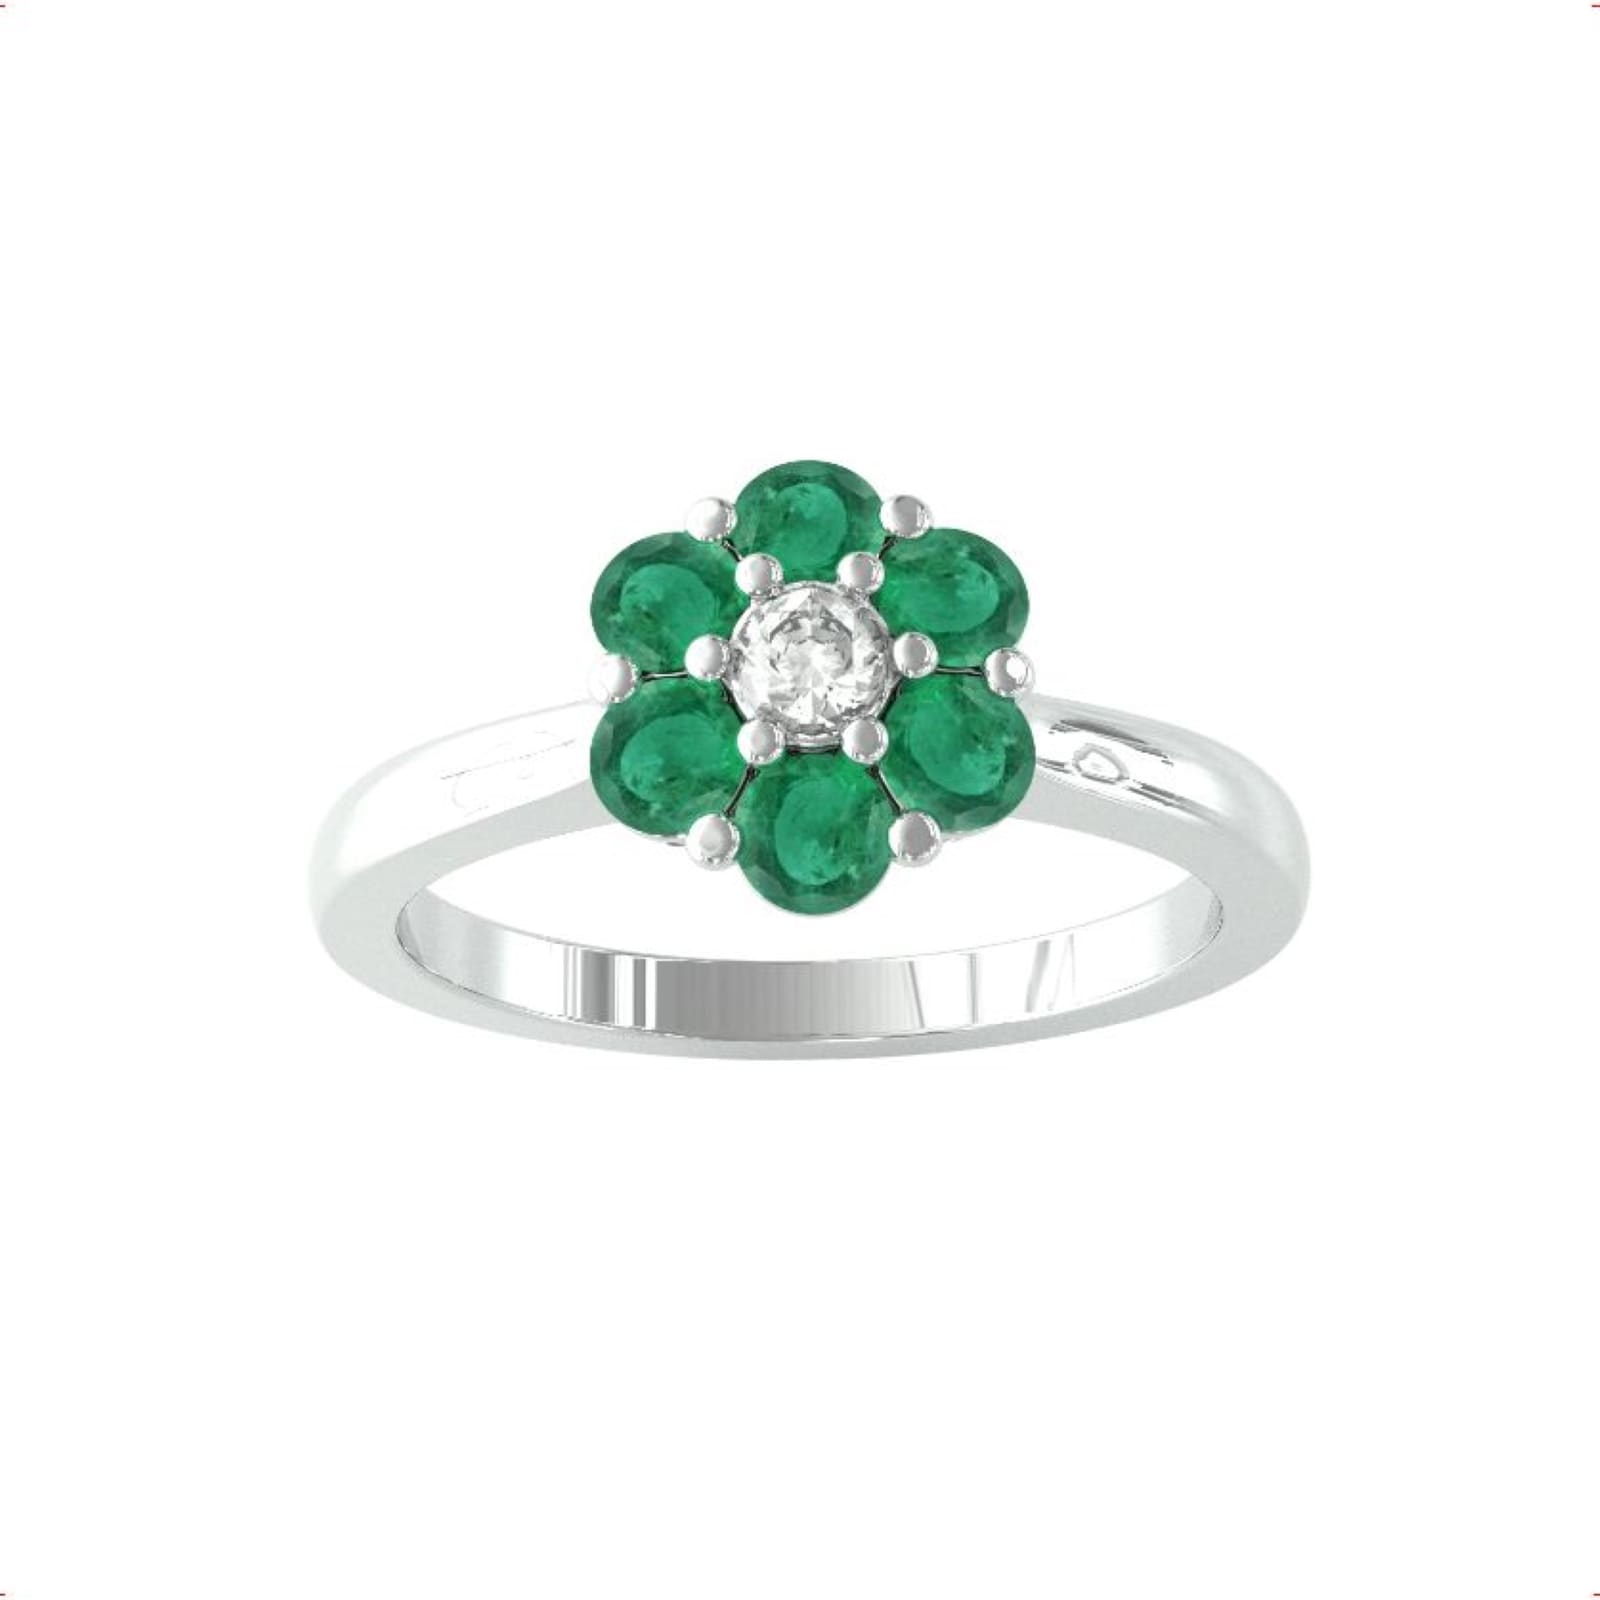 9ct White Gold Emerald & Diamond Cluster Ring - Ring Size J.5